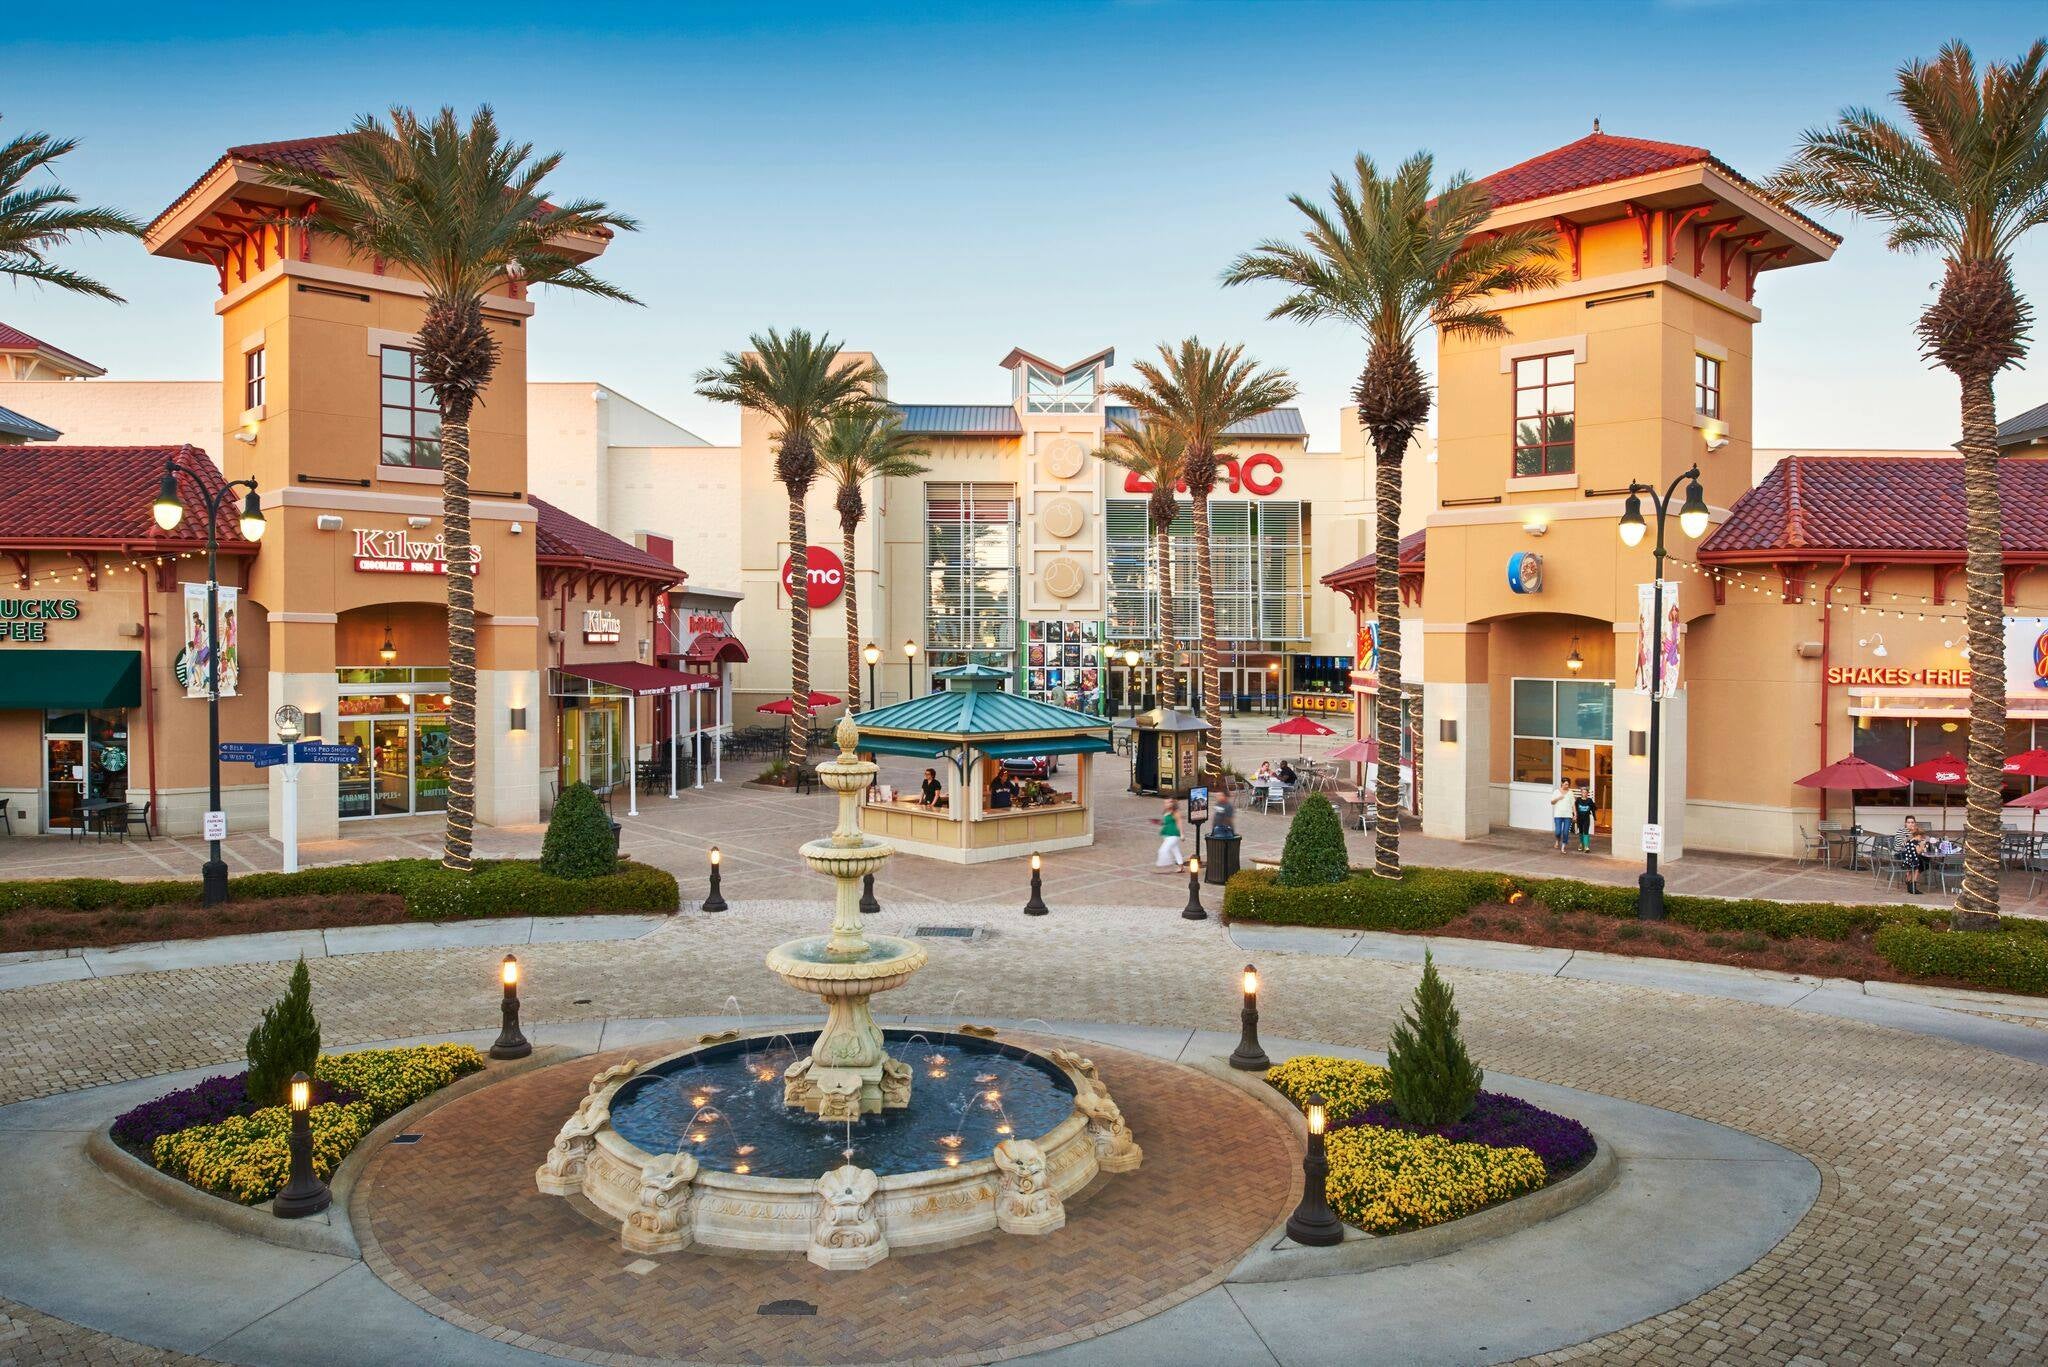 Visit Destin Commons for Shopping and Dining